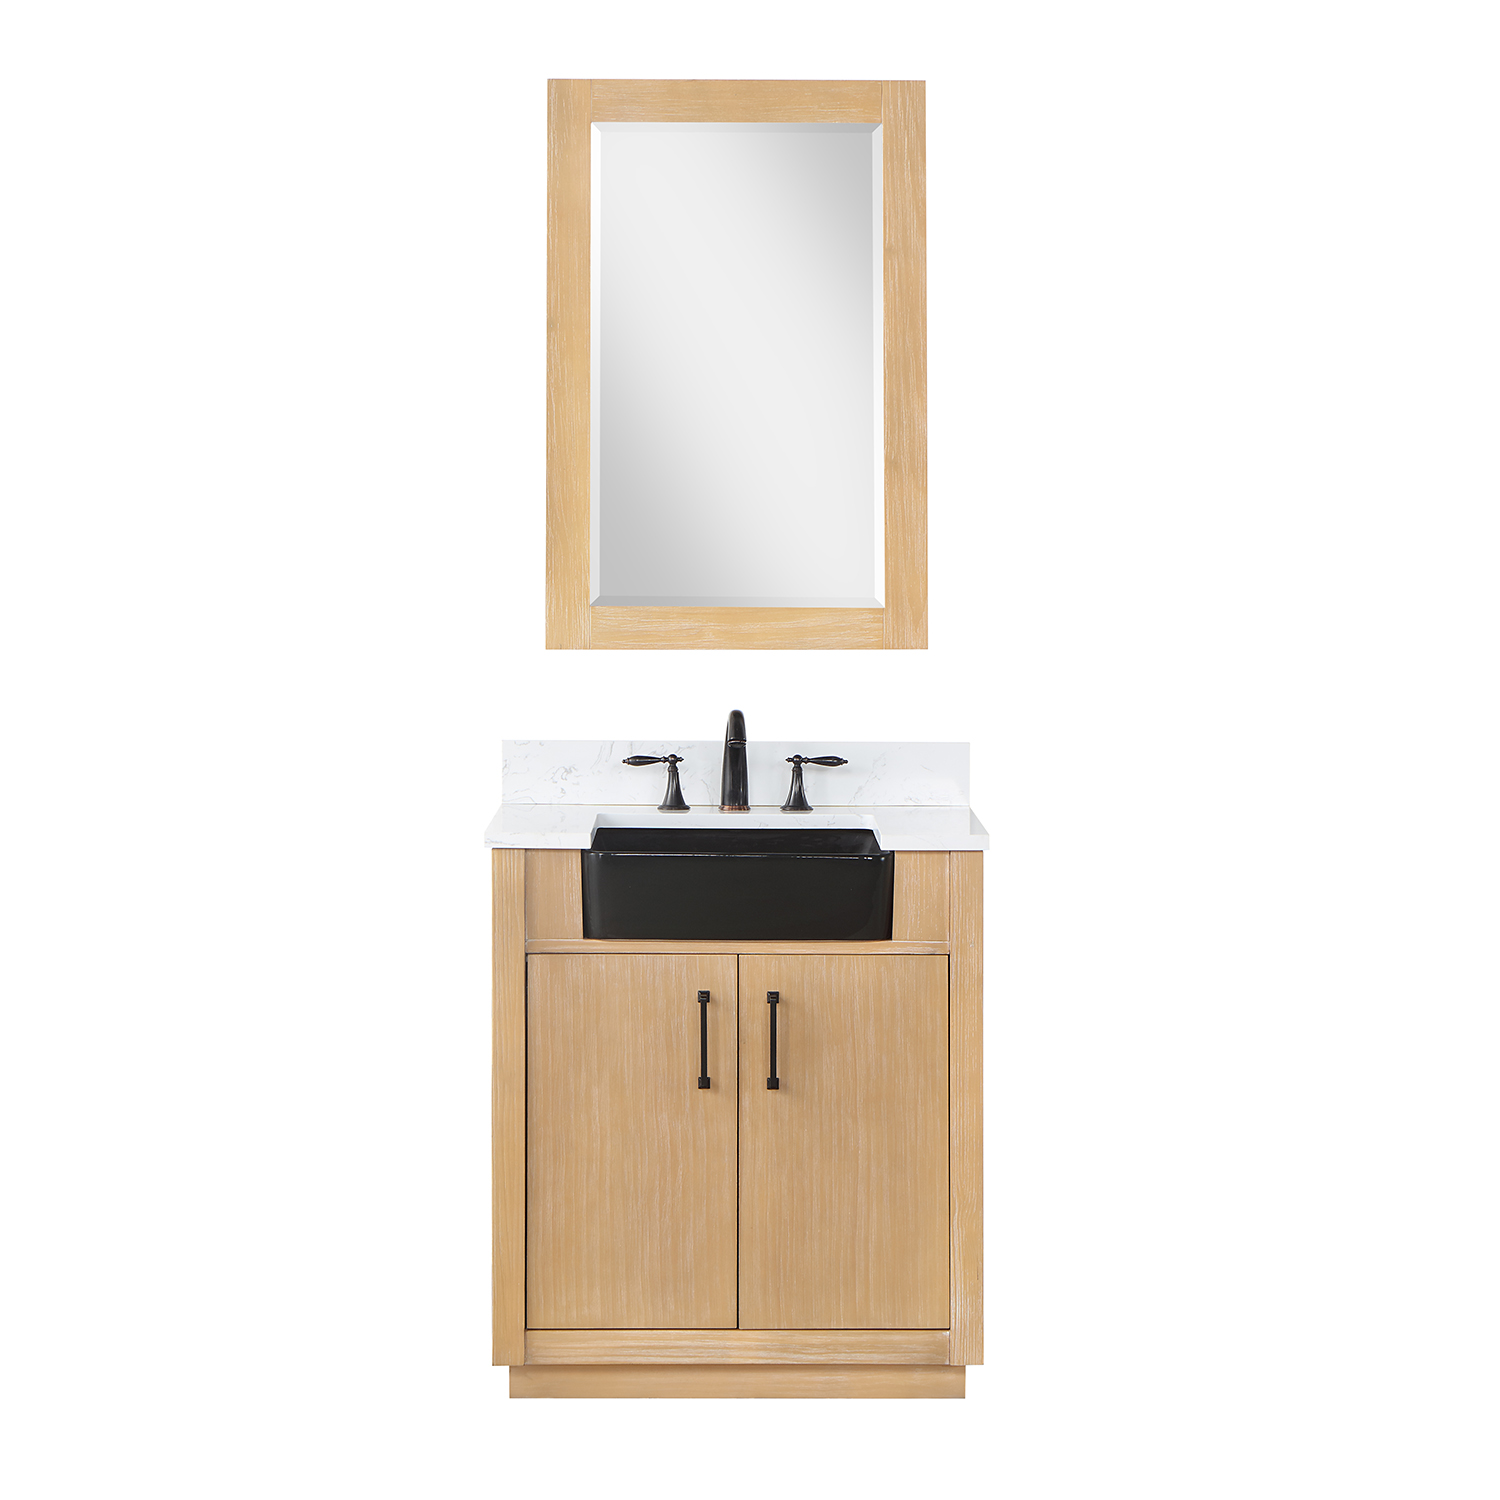 Issac Edwards Collection 30" Single Bathroom Vanity in Weathered Pine with Carrara White Composite Stone Countertop and Farmhouse Sink without Mirror